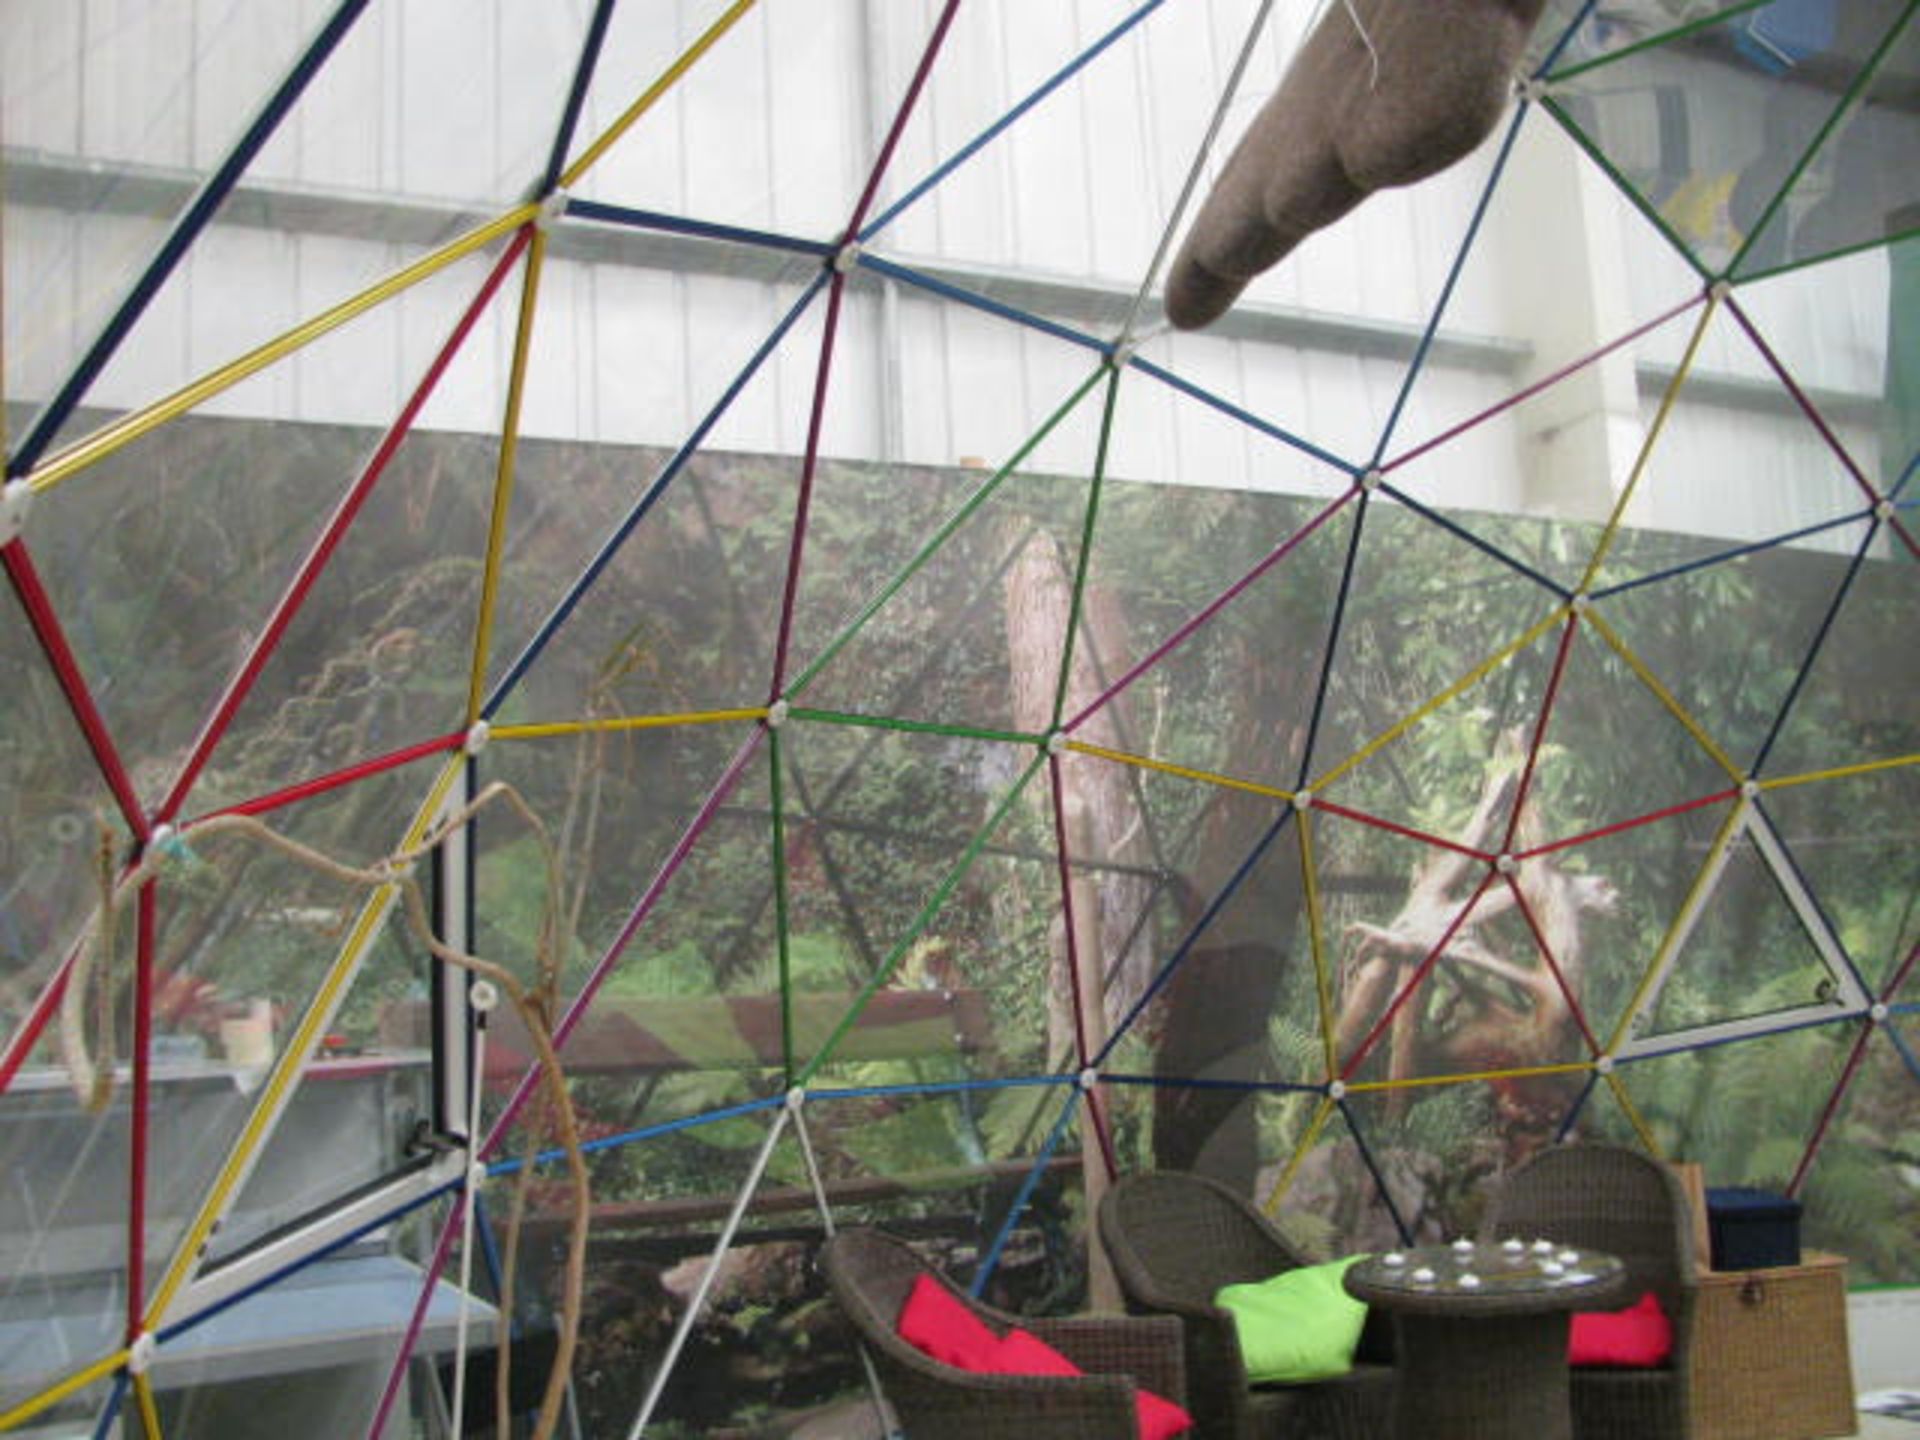 Geodesic dome garden room - Image 3 of 6